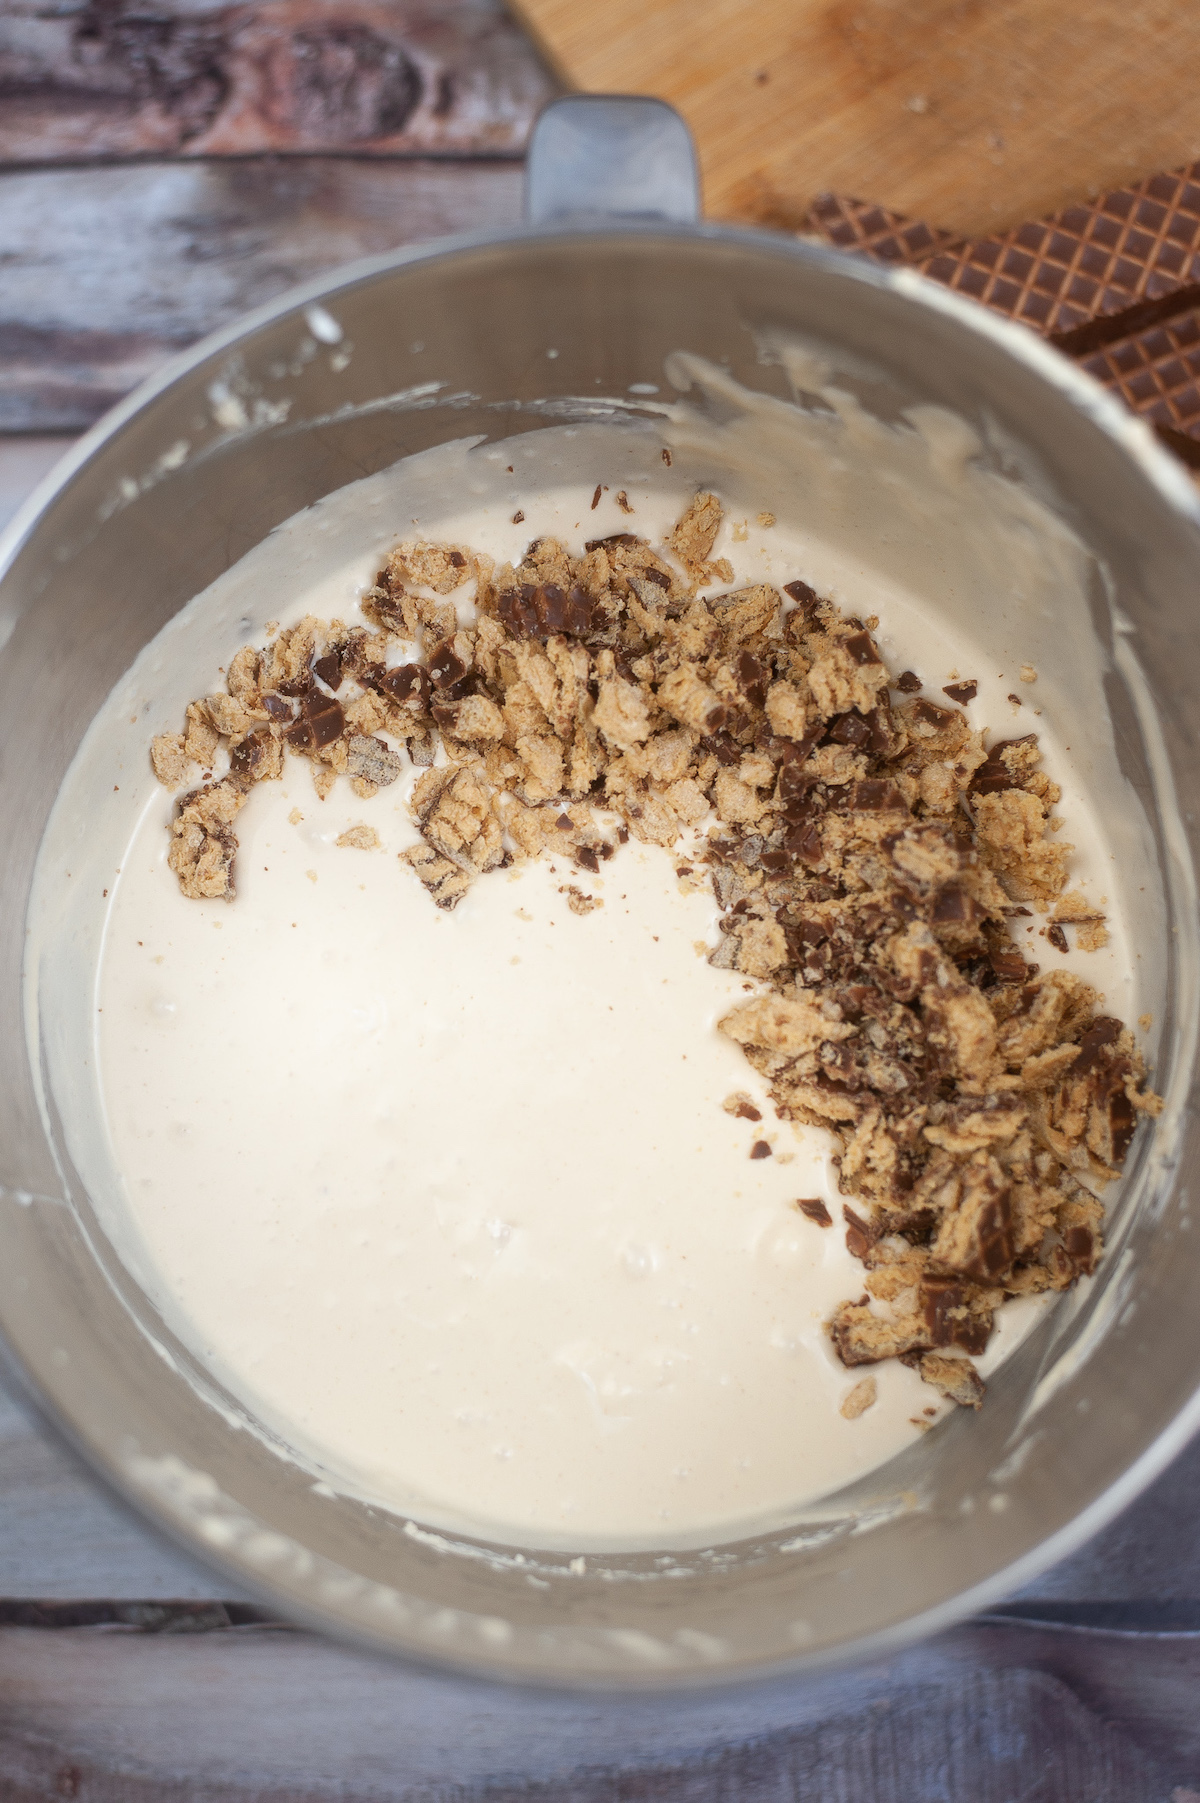 add the chopped Nutty Buddy bars to the peanut butter ice cream